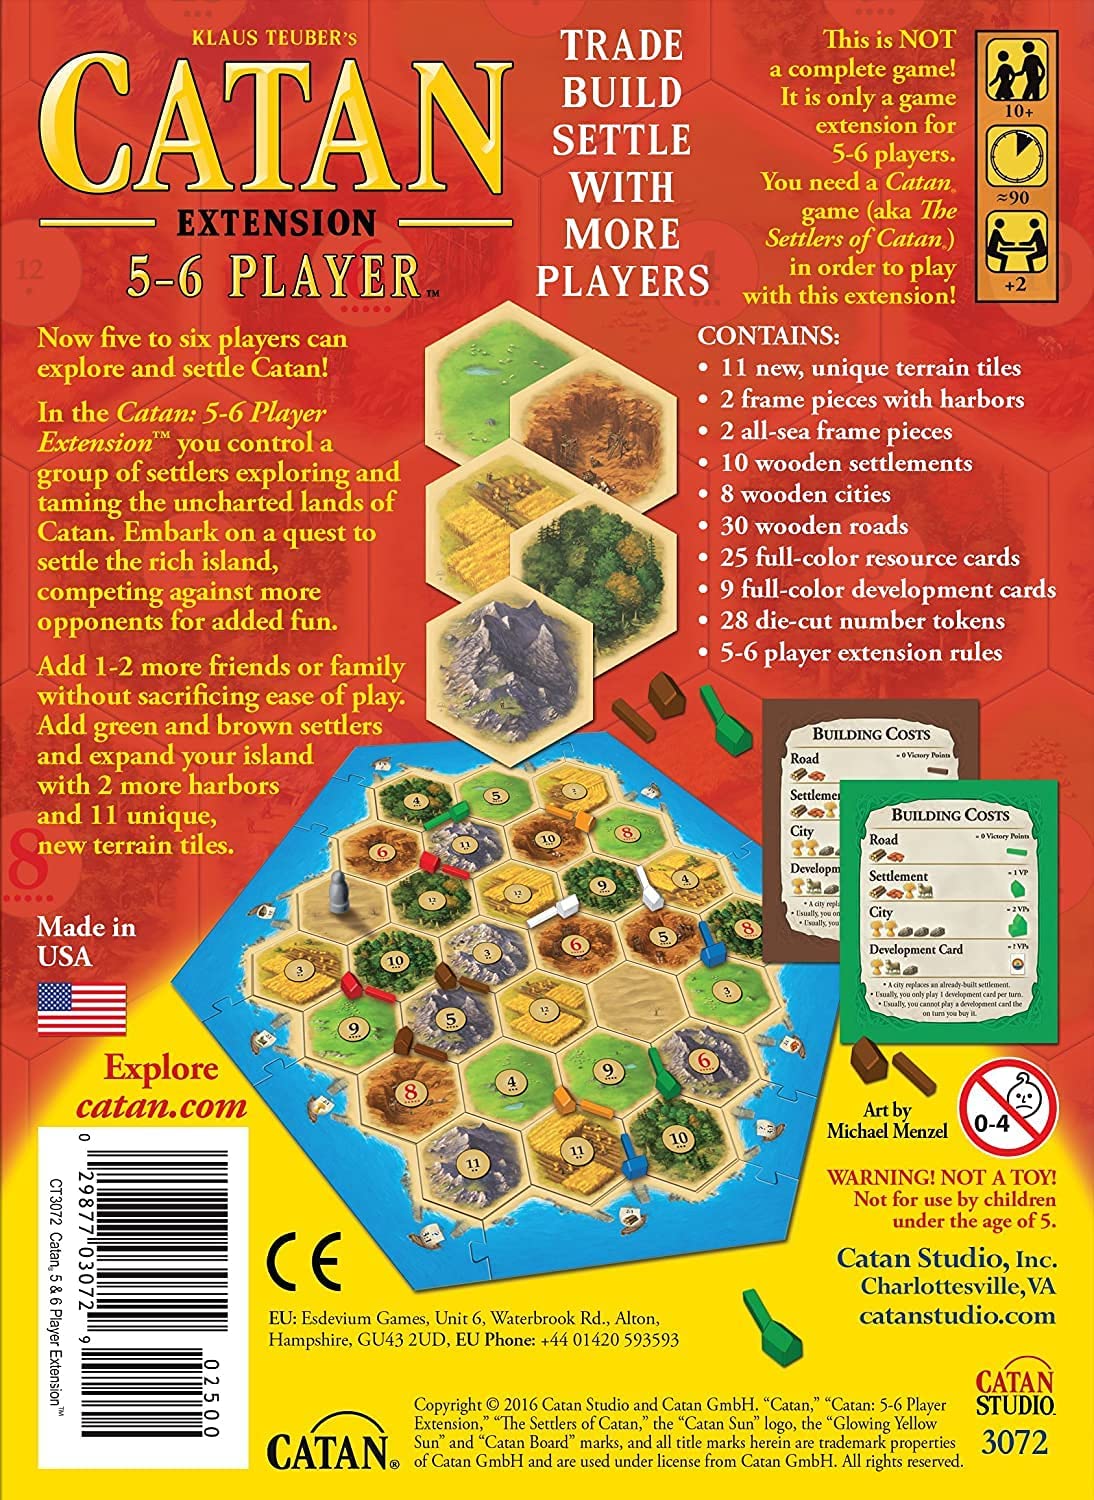 Catan 5-6 Player Extension (5th Edition) back of box